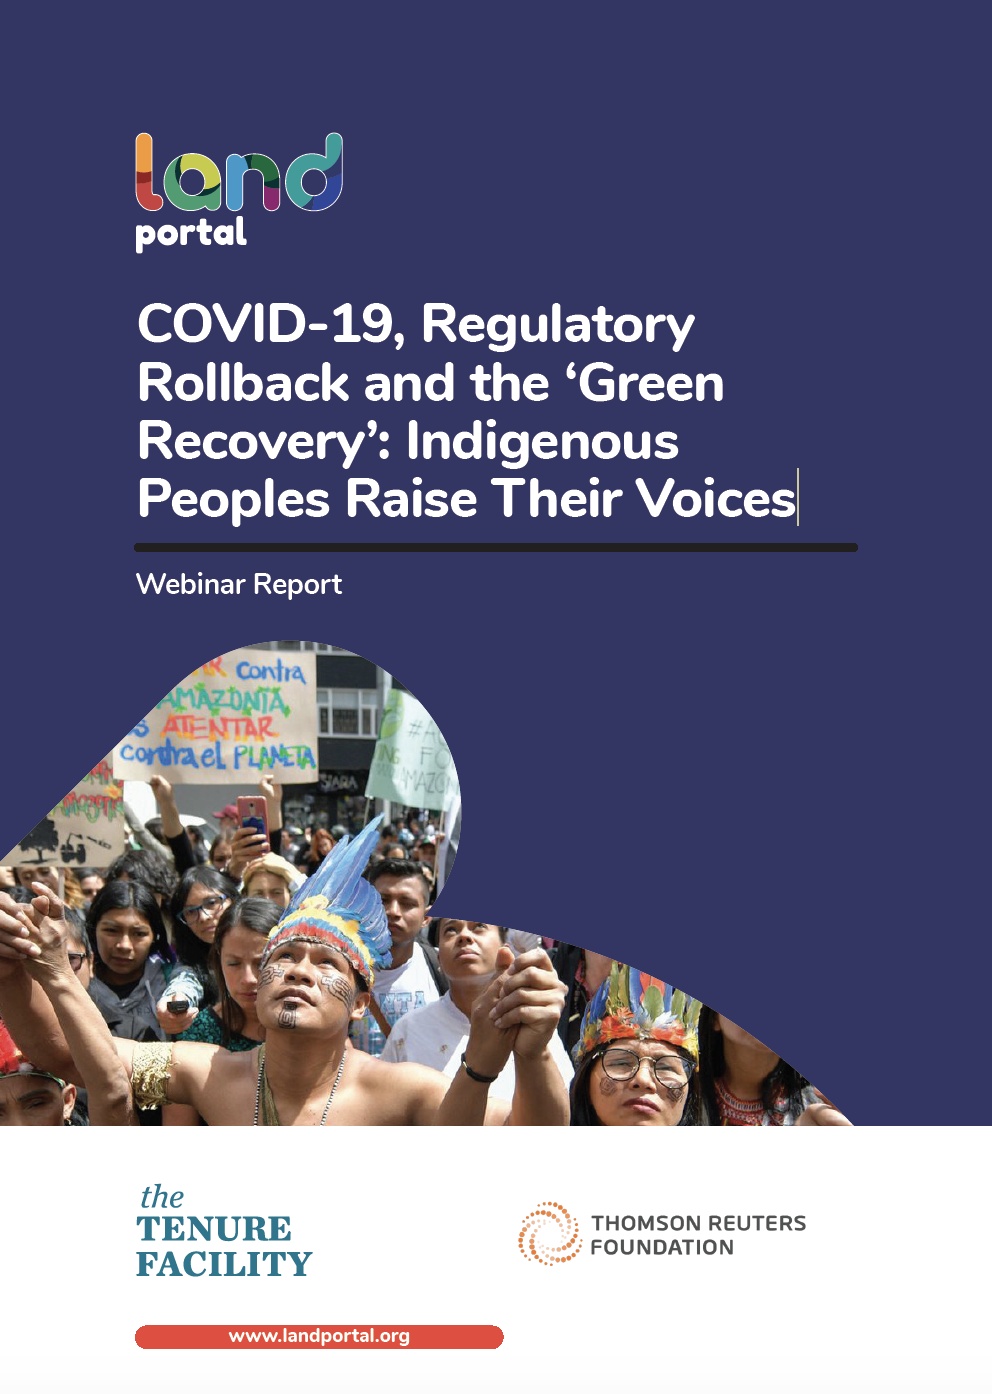 COVID-19, Regulatory Rollback and the ‘Green Recovery’: Indigenous Peoples Raise Their Voices